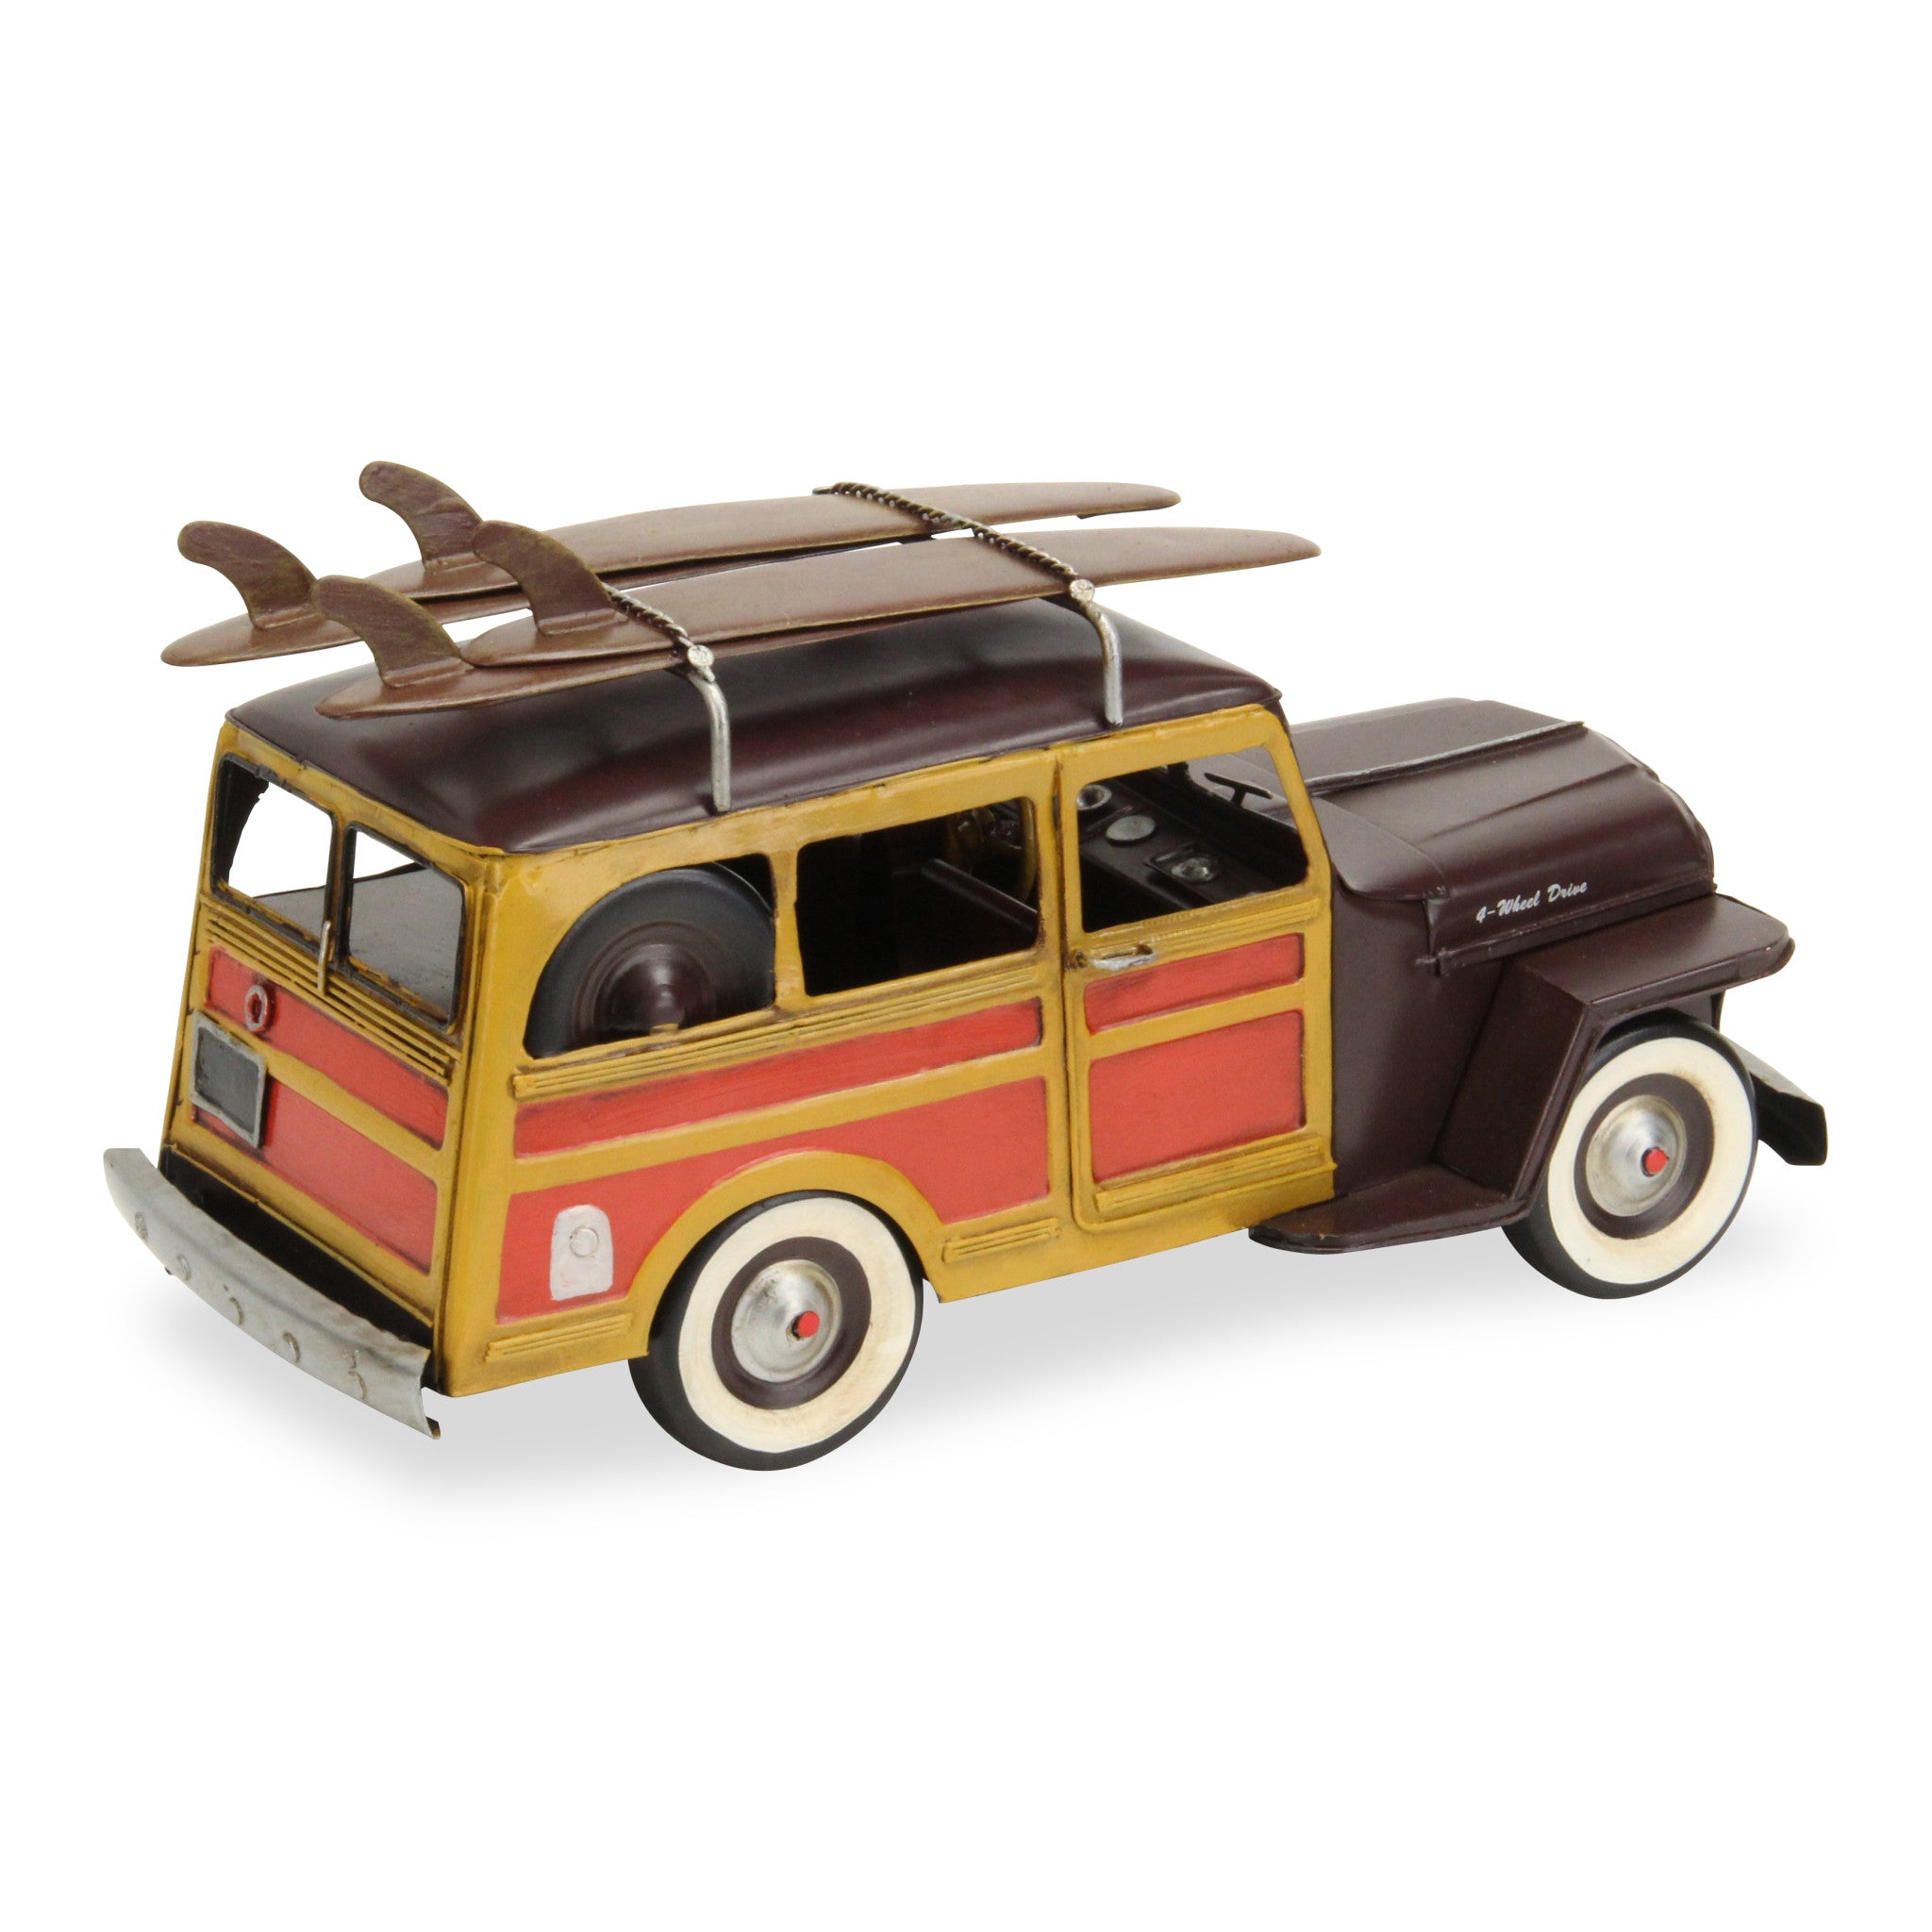 8" Yellow and Brown Metal Hand Painted Model Car